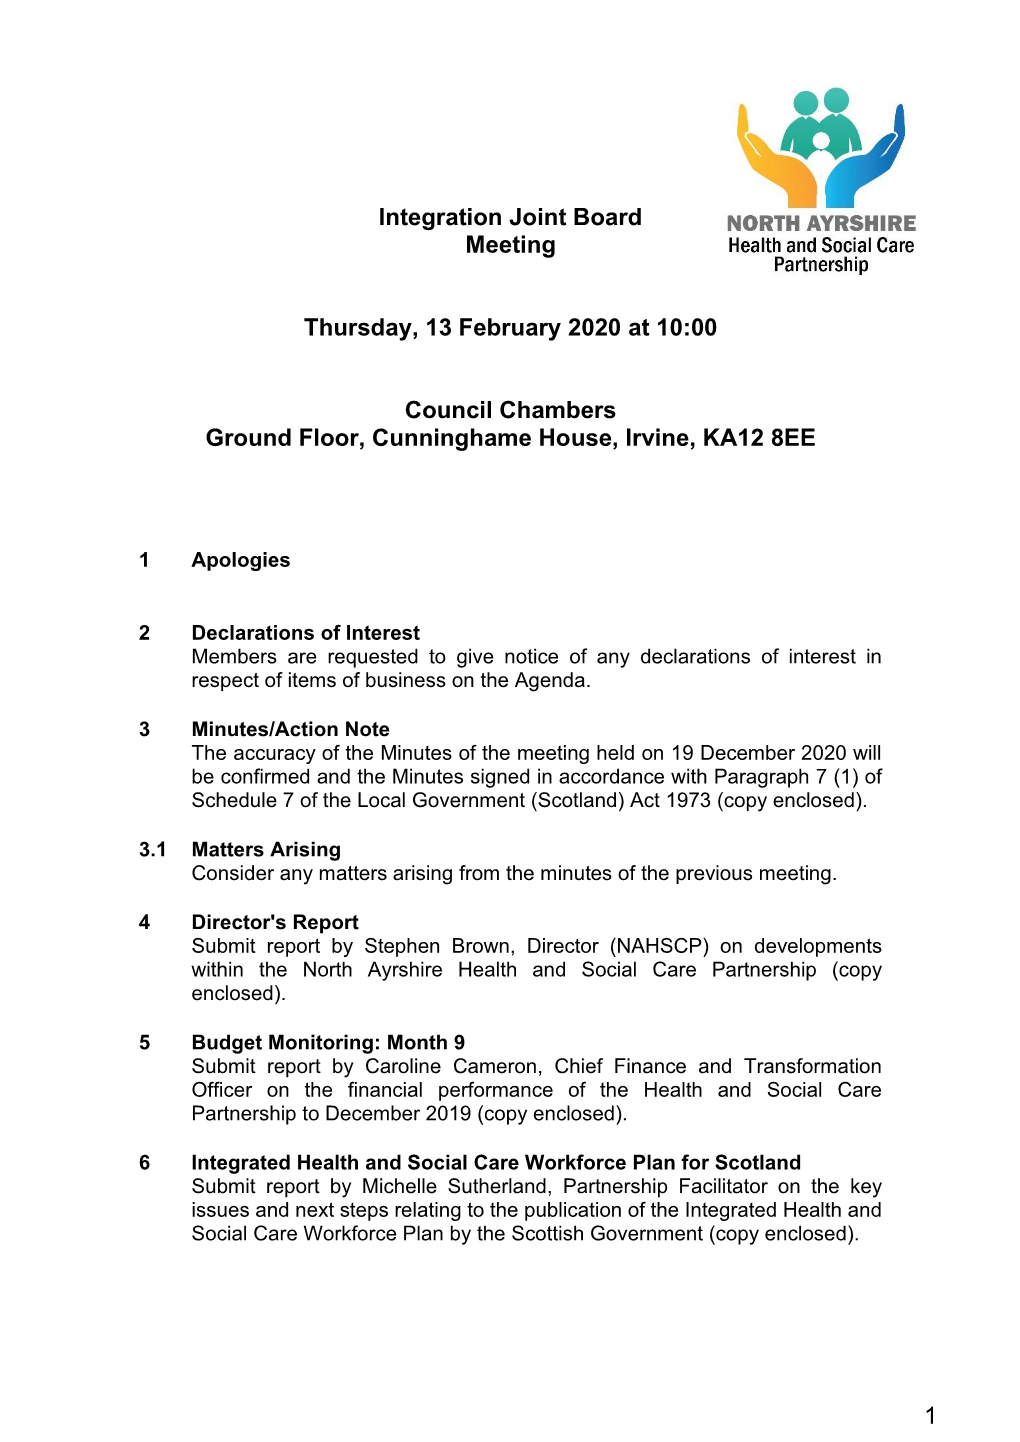 Integration Joint Board Meeting Thursday, 13 February 2020 at 10